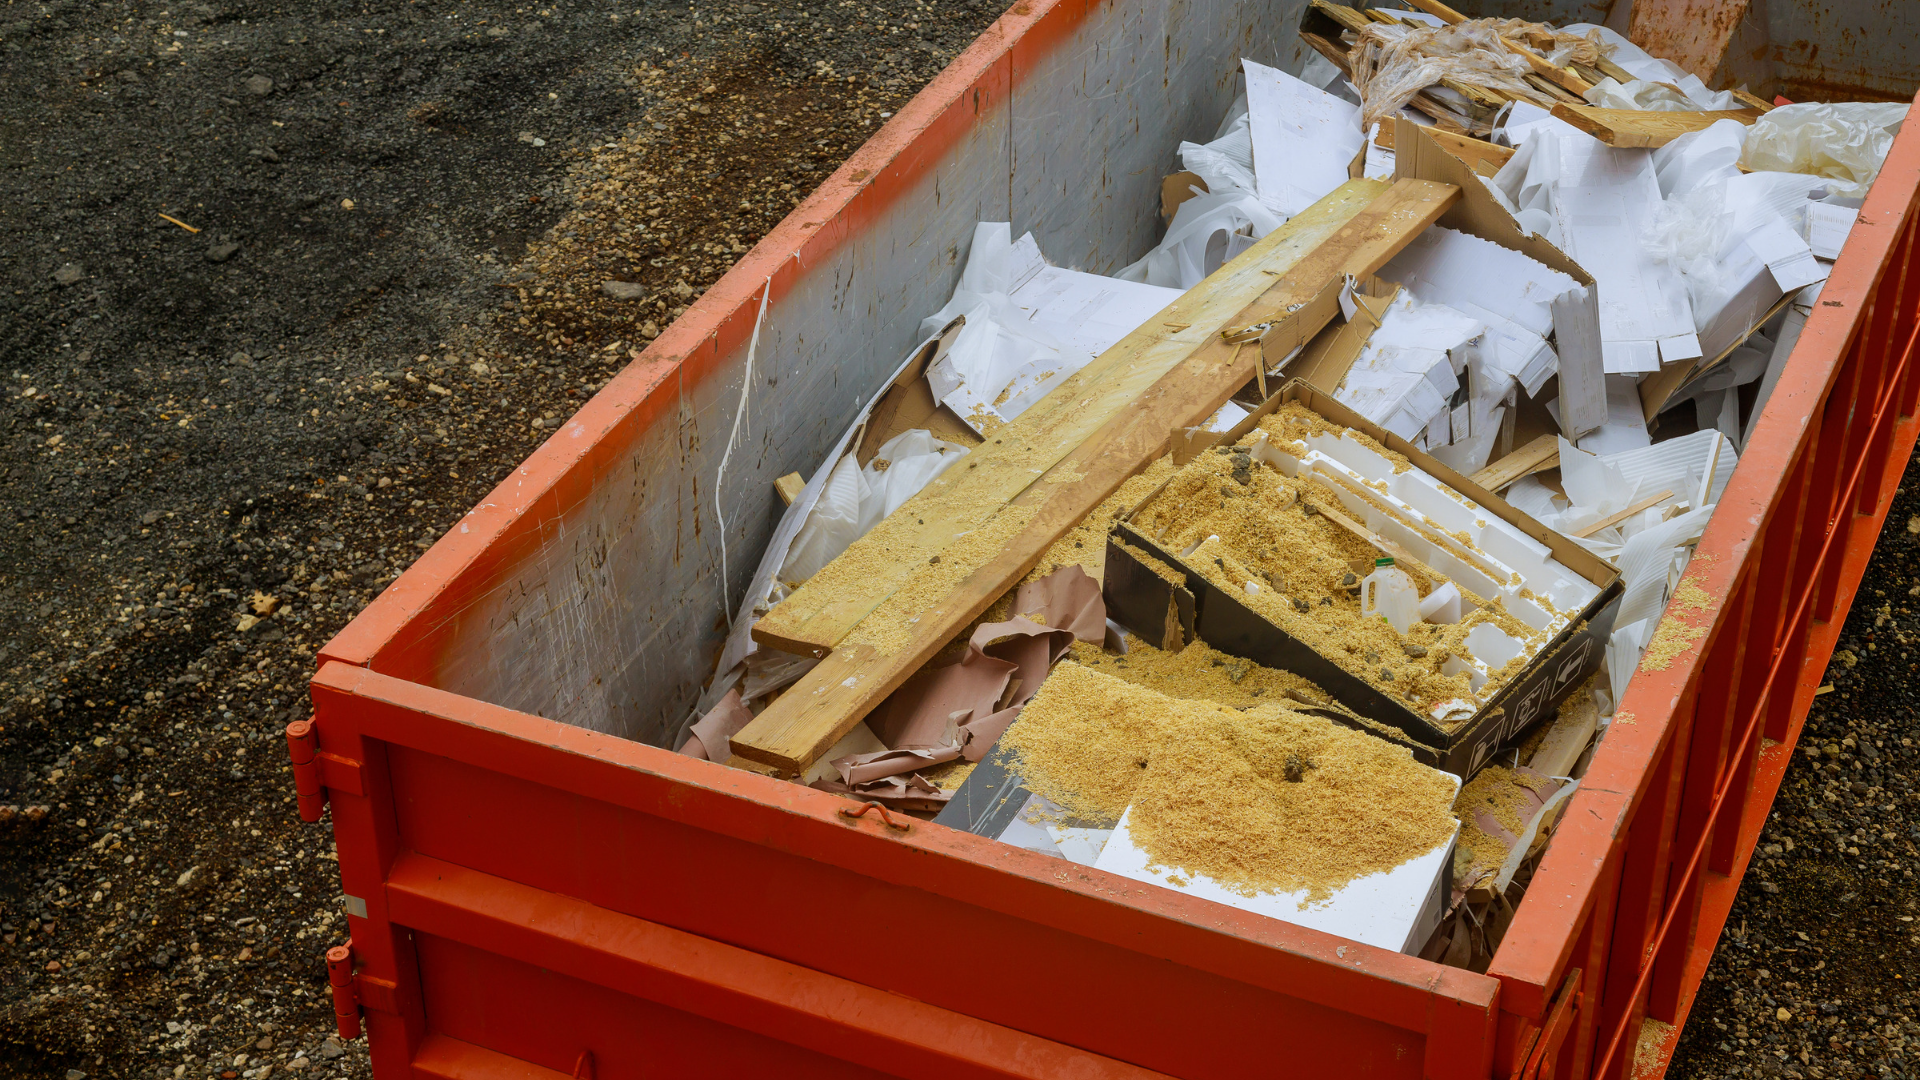 The Pros and Cons of Junk Removal vs Dumpster Rental